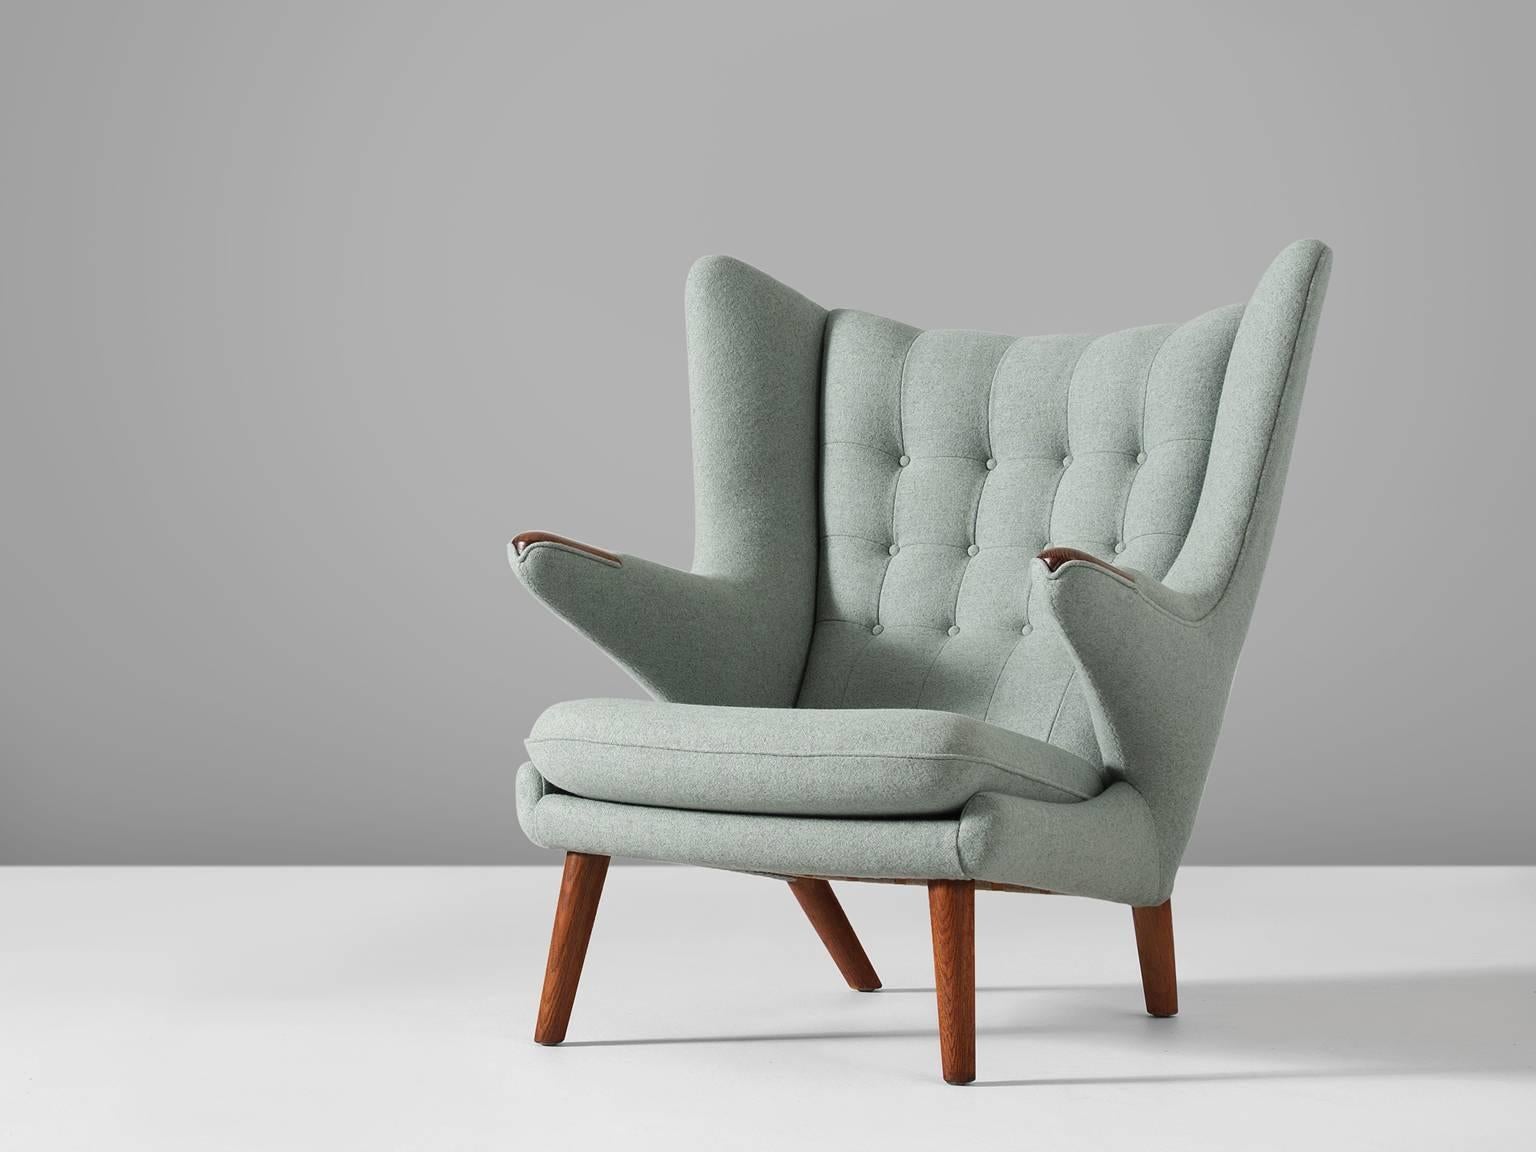 Lounge chair Model AP 19 'Papa Bear' designed by Hans J. Wegner, manufactured by AP Stolen, Denmark, 1951 design, production late 1950s, reupholstery by Morentz.

This semi-wingback armchair, has an open expression in contrast with its historical